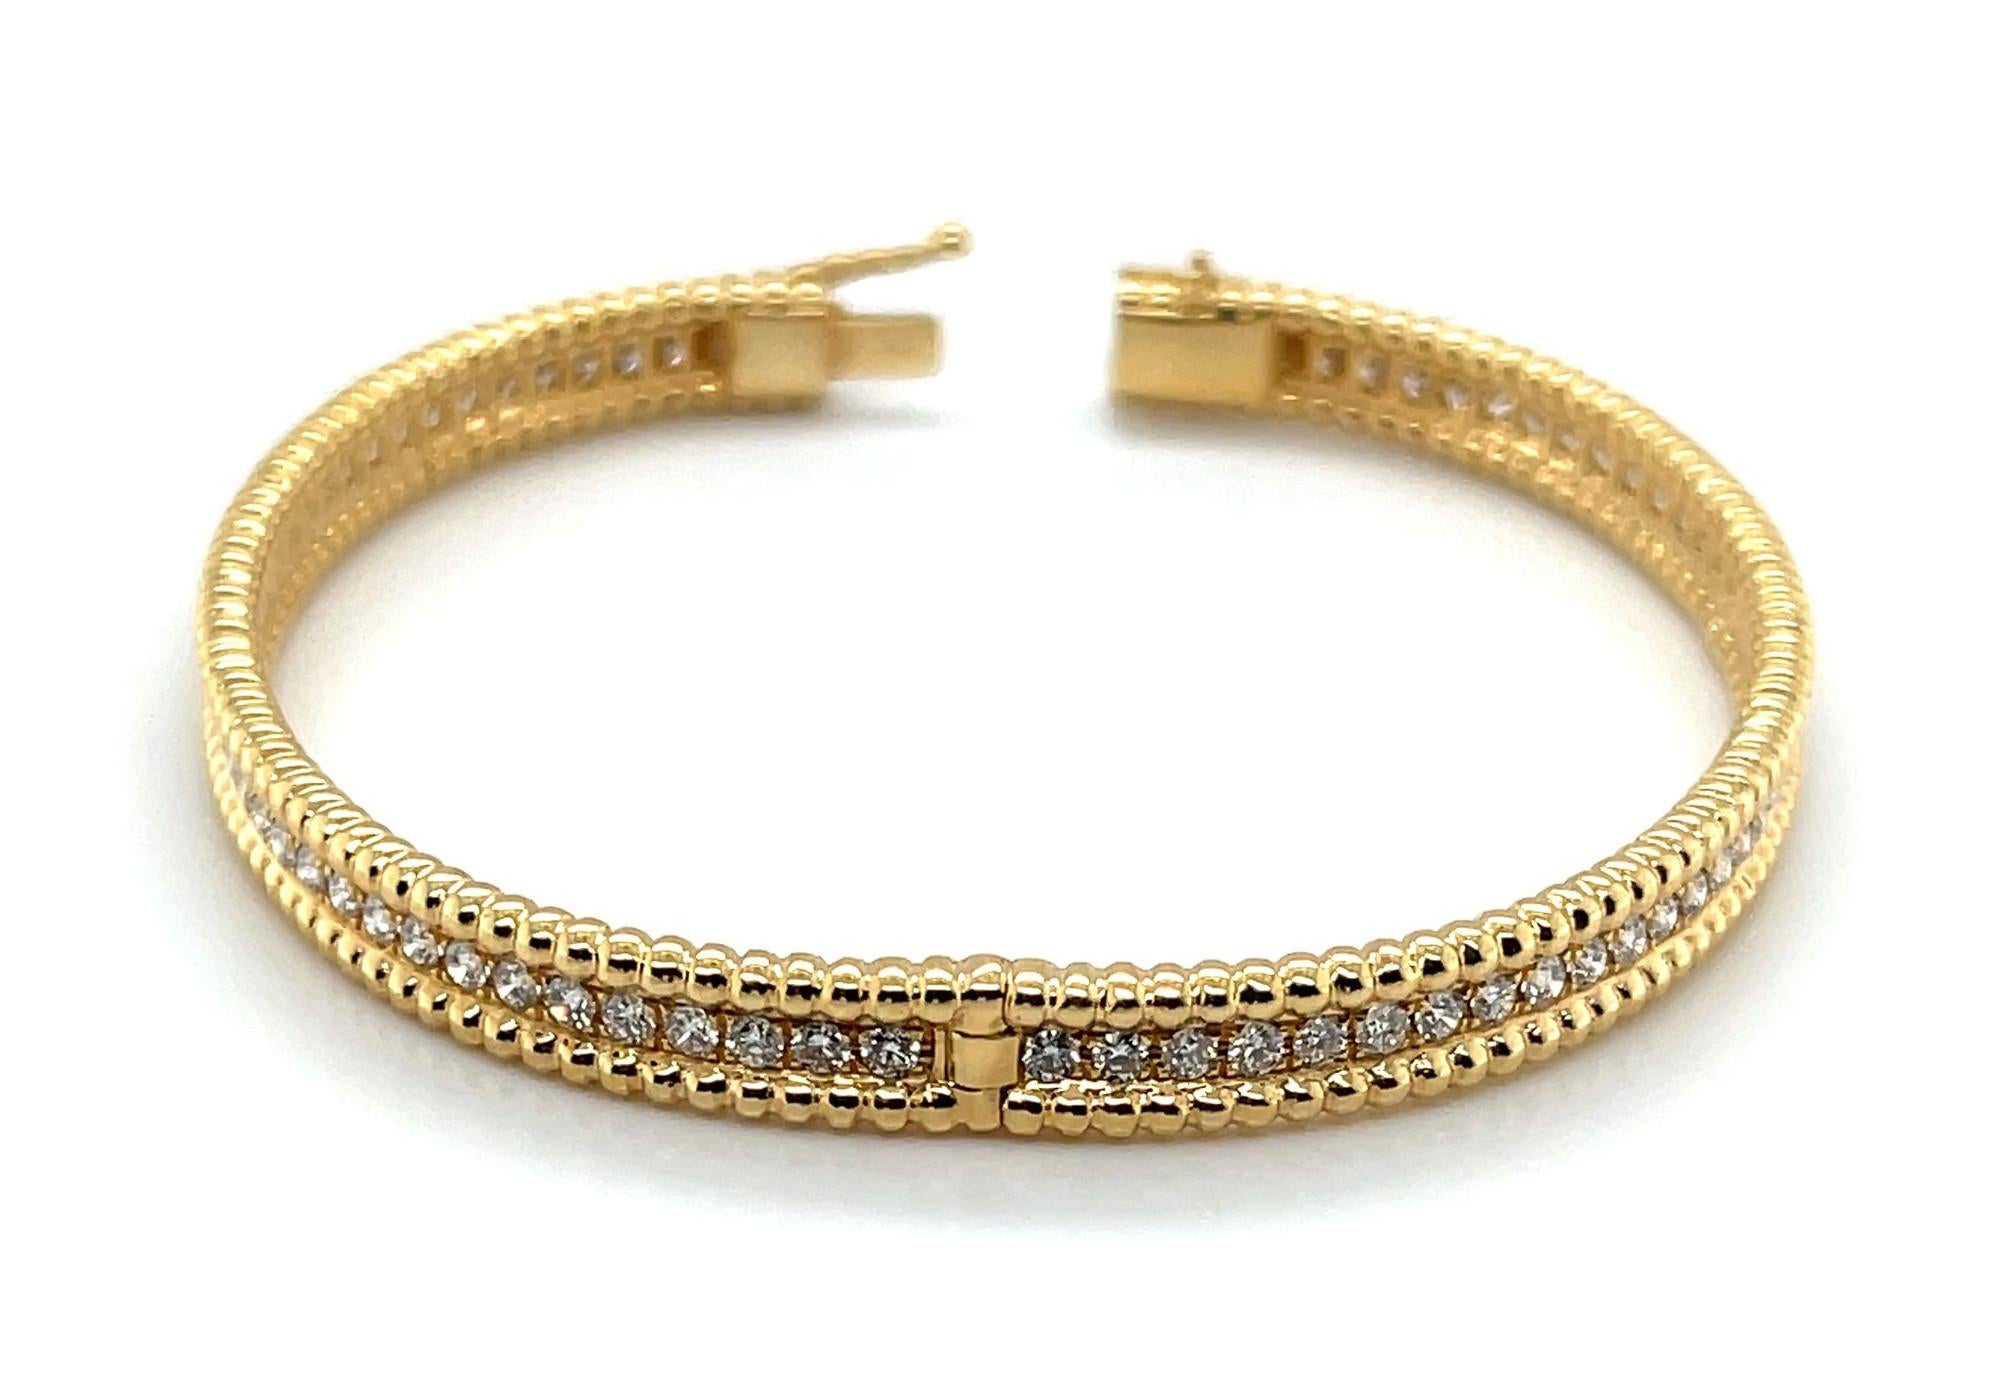 Diamond and 18k Yellow Gold Hinged Bangle Bracelet, 1.95 Carats Total In New Condition For Sale In Los Angeles, CA